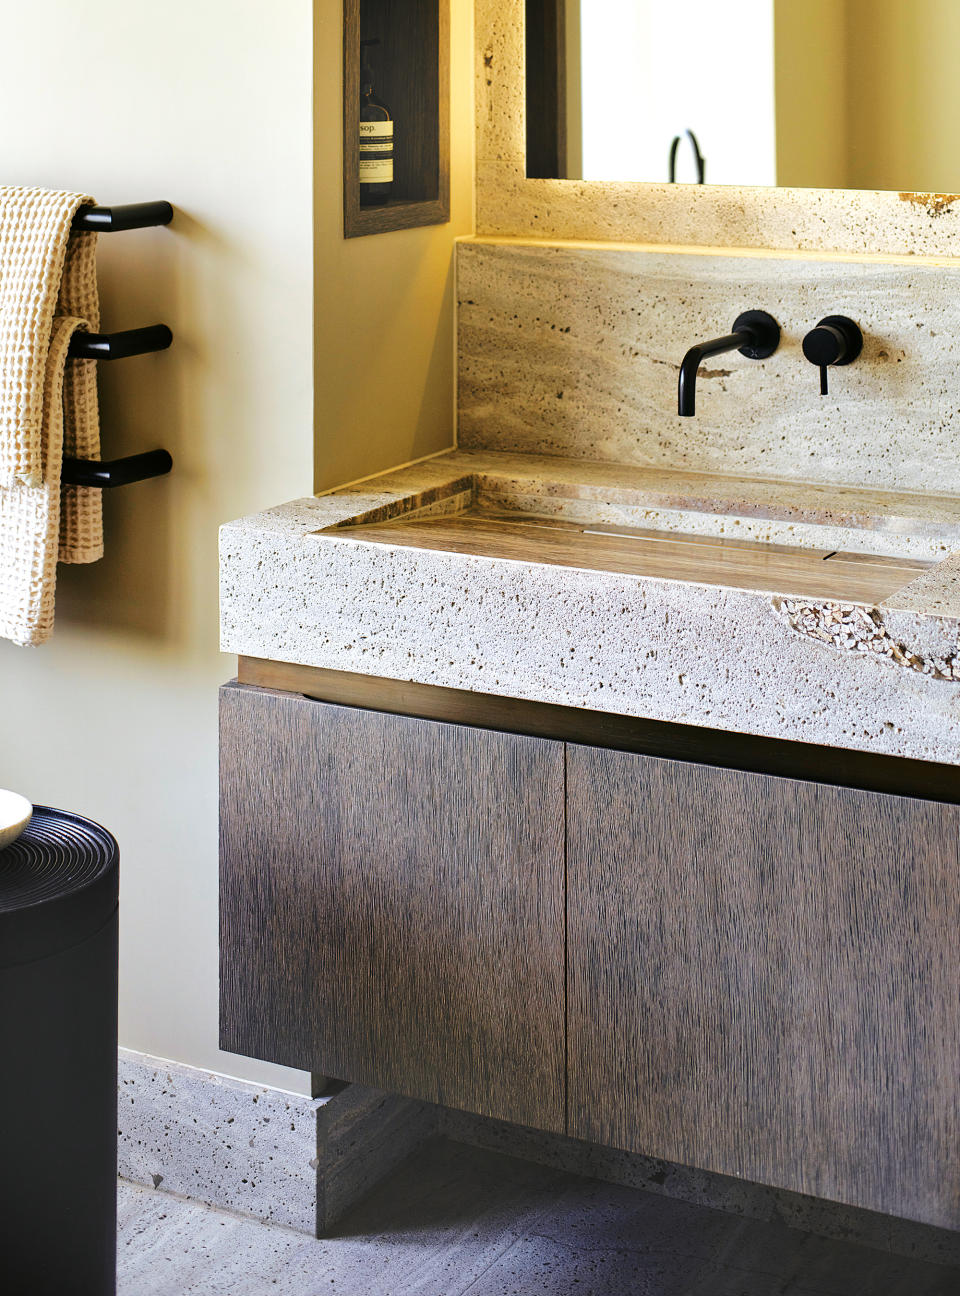 <p> Raw limestone and brushed oak make a compelling duo that champions nature’s imperfections. For this modern bespoke bathroom vanity unit by Hetherington Newman, interior designer Lisa Keates specified an unfilled Belgian limestone for the external elements of the vanity top, and the same material honed and filled for the basin interiors. </p> <p> ‘The idea was to enjoy the beautiful texture and practical durability without switching materials, while the brushed fumed oak cabinet featuring a bronze shadow gap adds yet more texture,’ explains Lisa, founder of Keates Interiors. ‘Stone needs resealing regularly to stop agents such as soap or toothpaste from etching the surface finish,’ she advises. </p>